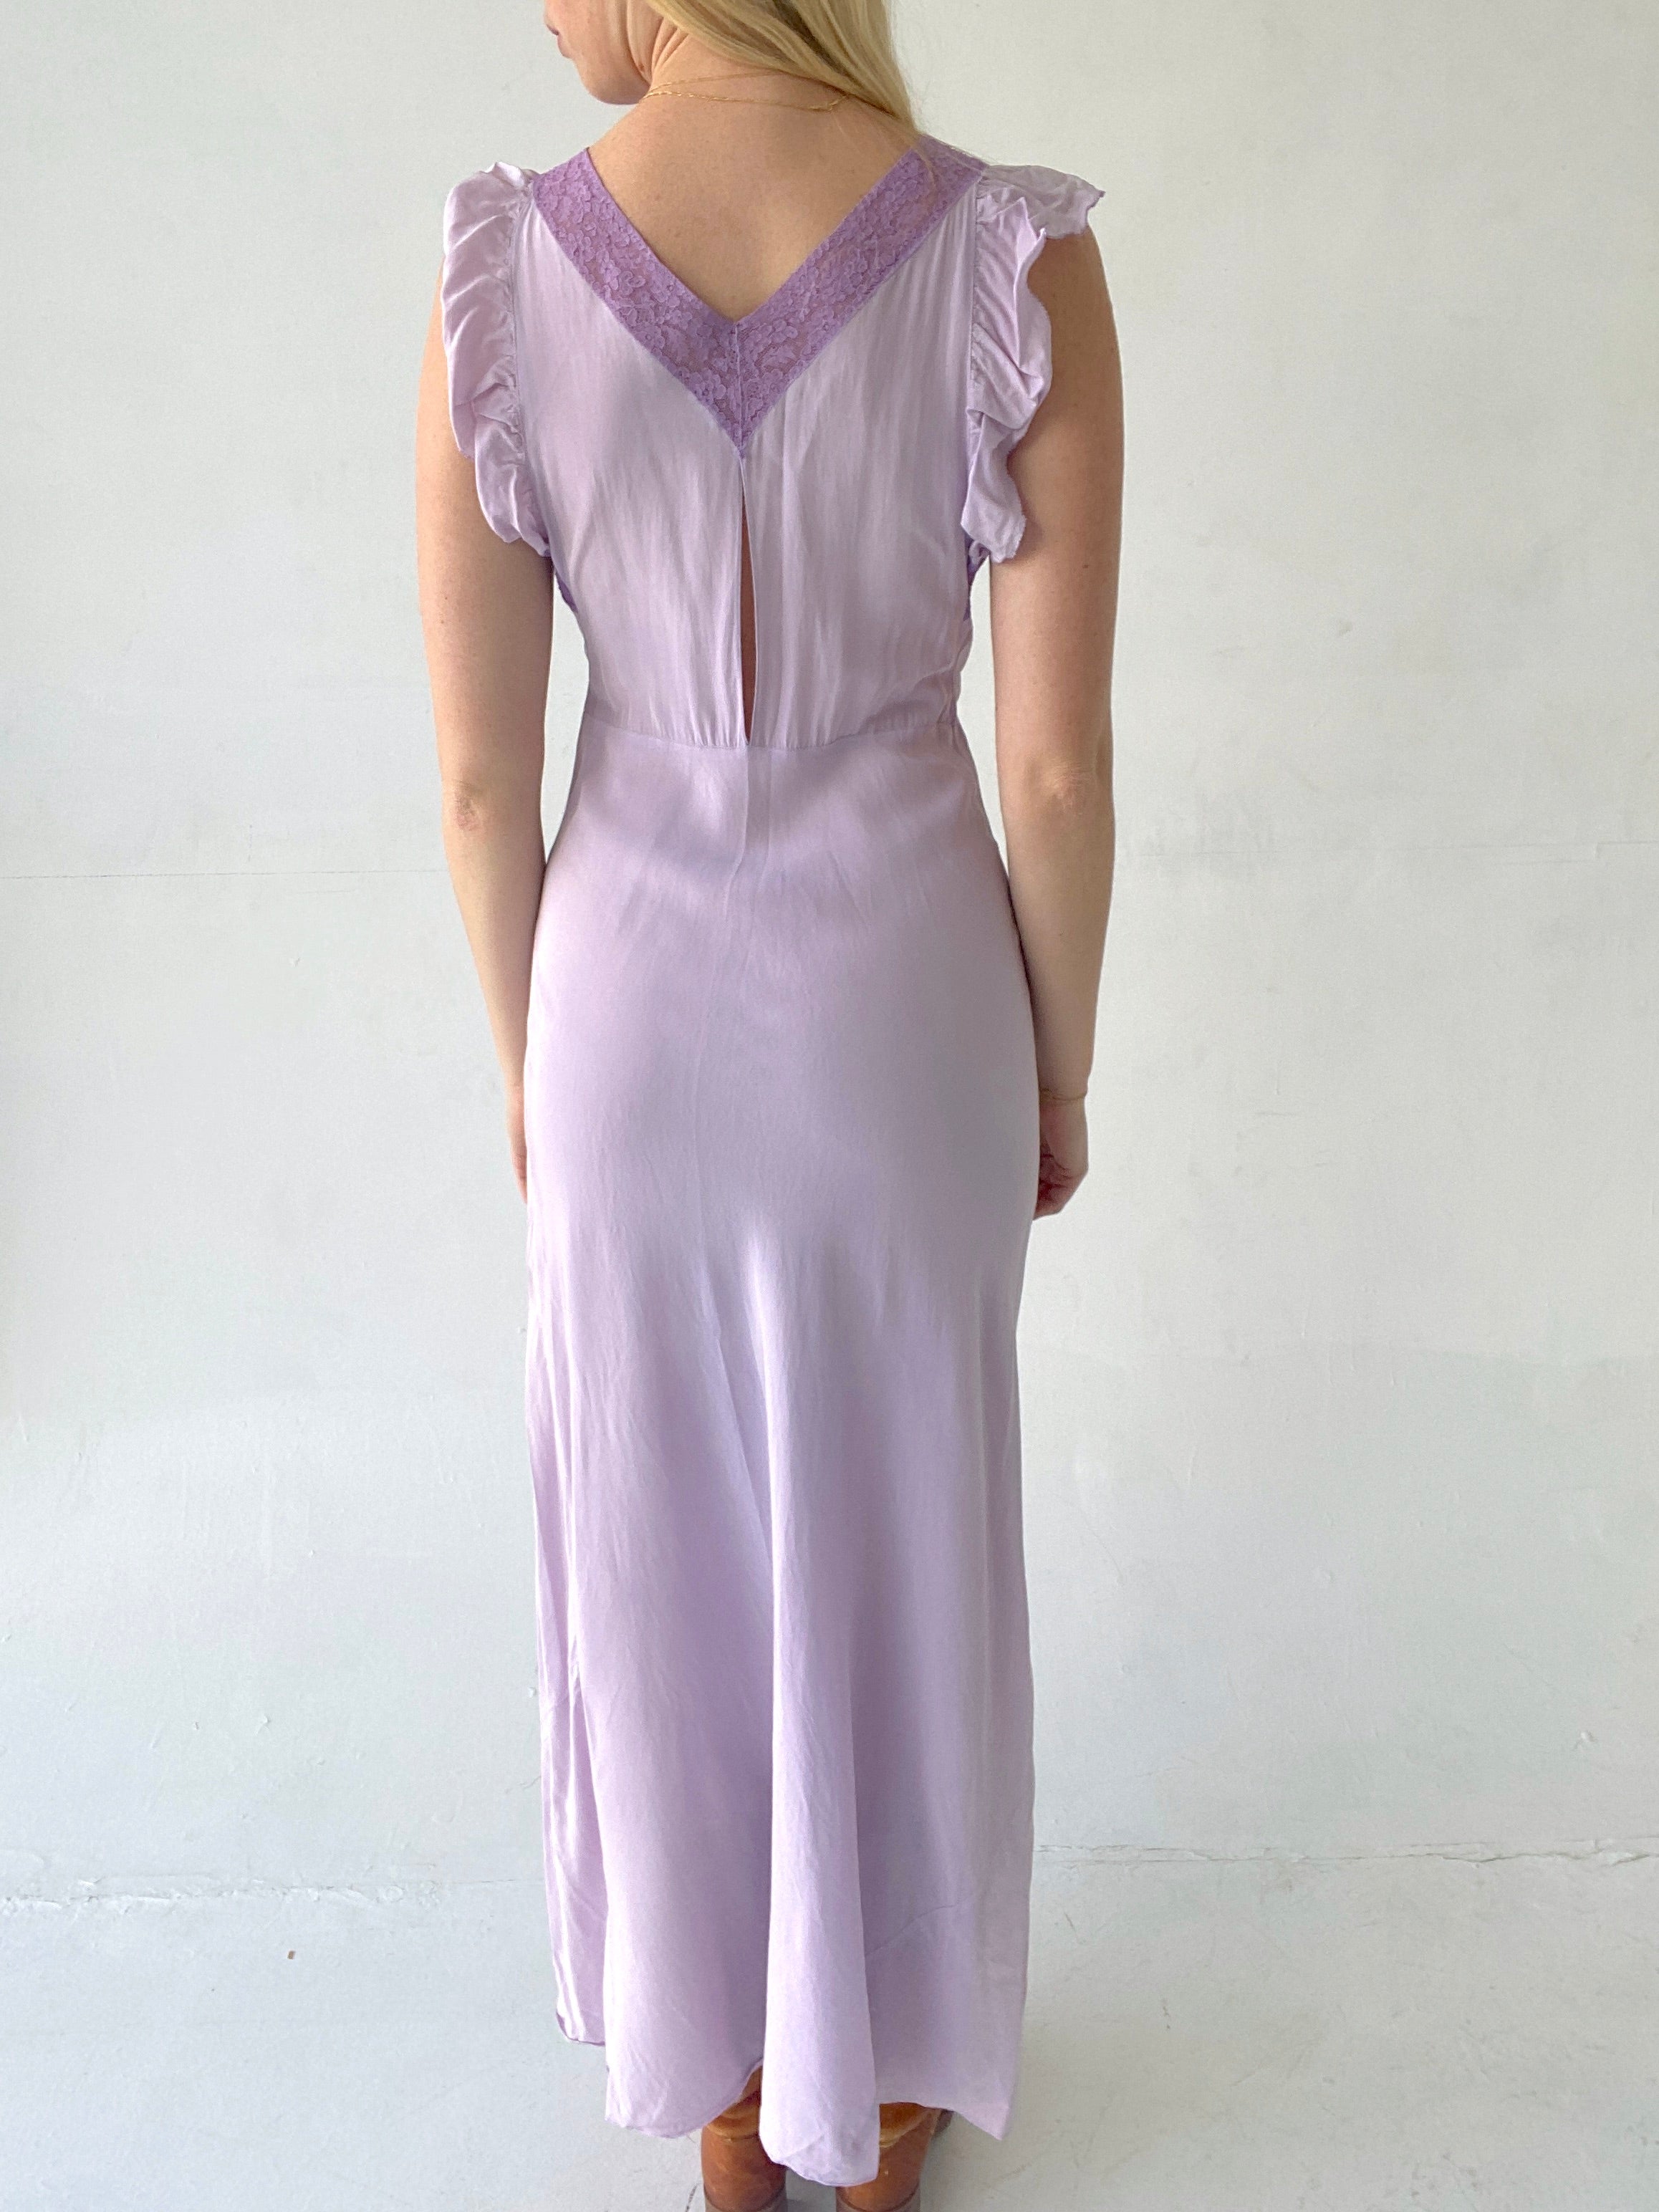 Hand Dyed Saie Lilac Slip with Lace and Ruffle Sleeve